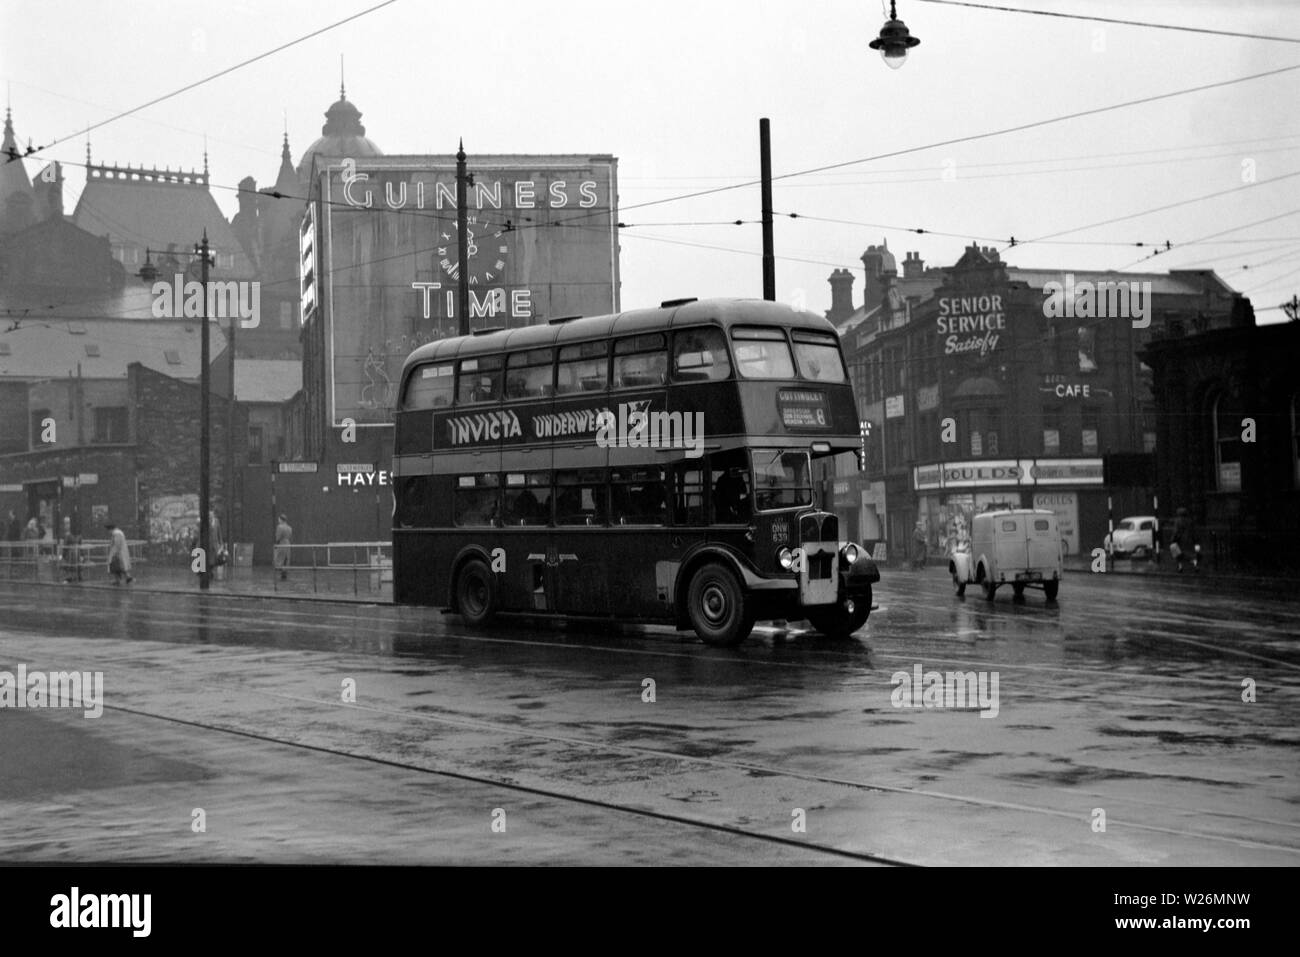 A rainy day near the Corn Exchange in Leeds city centre. The image shows a Roe Bodied AEC Regent III double decker bus on route to Cottingley. The vehicle would have been new in 1950. Note the old Guinness clock advertisement in the background. Stock Photo